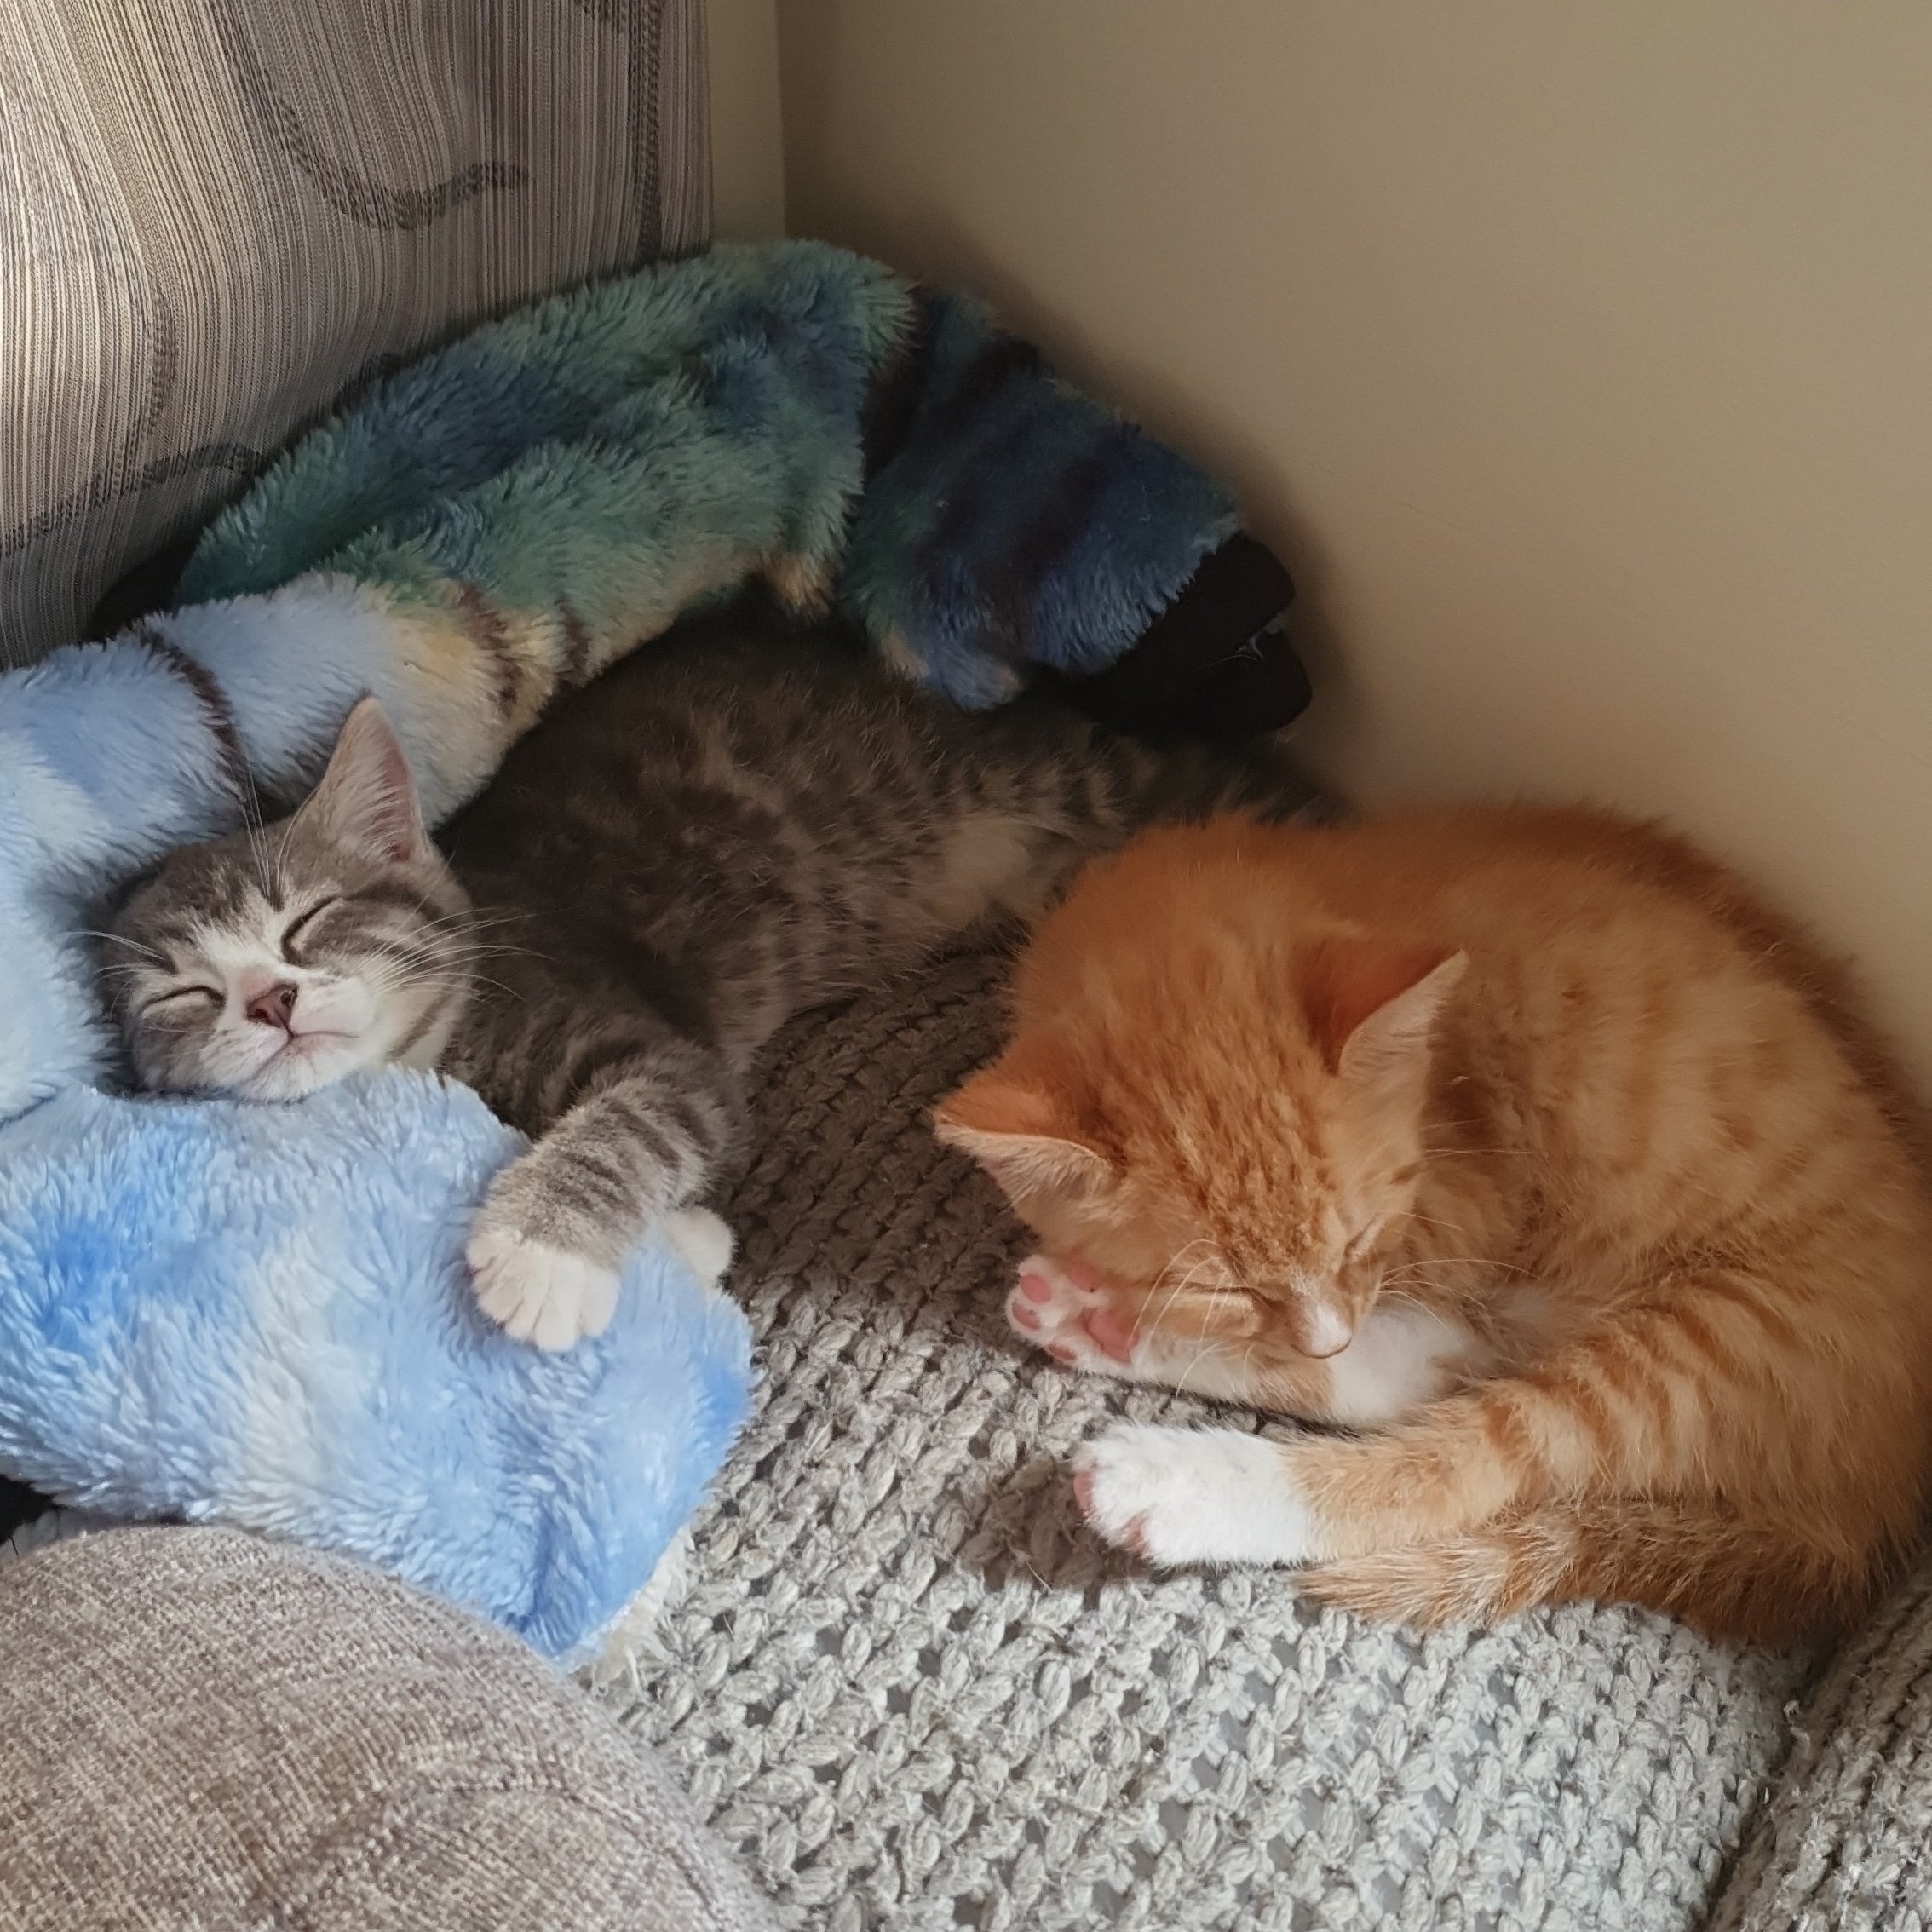 orange and gray striped kittens sleeping near each other